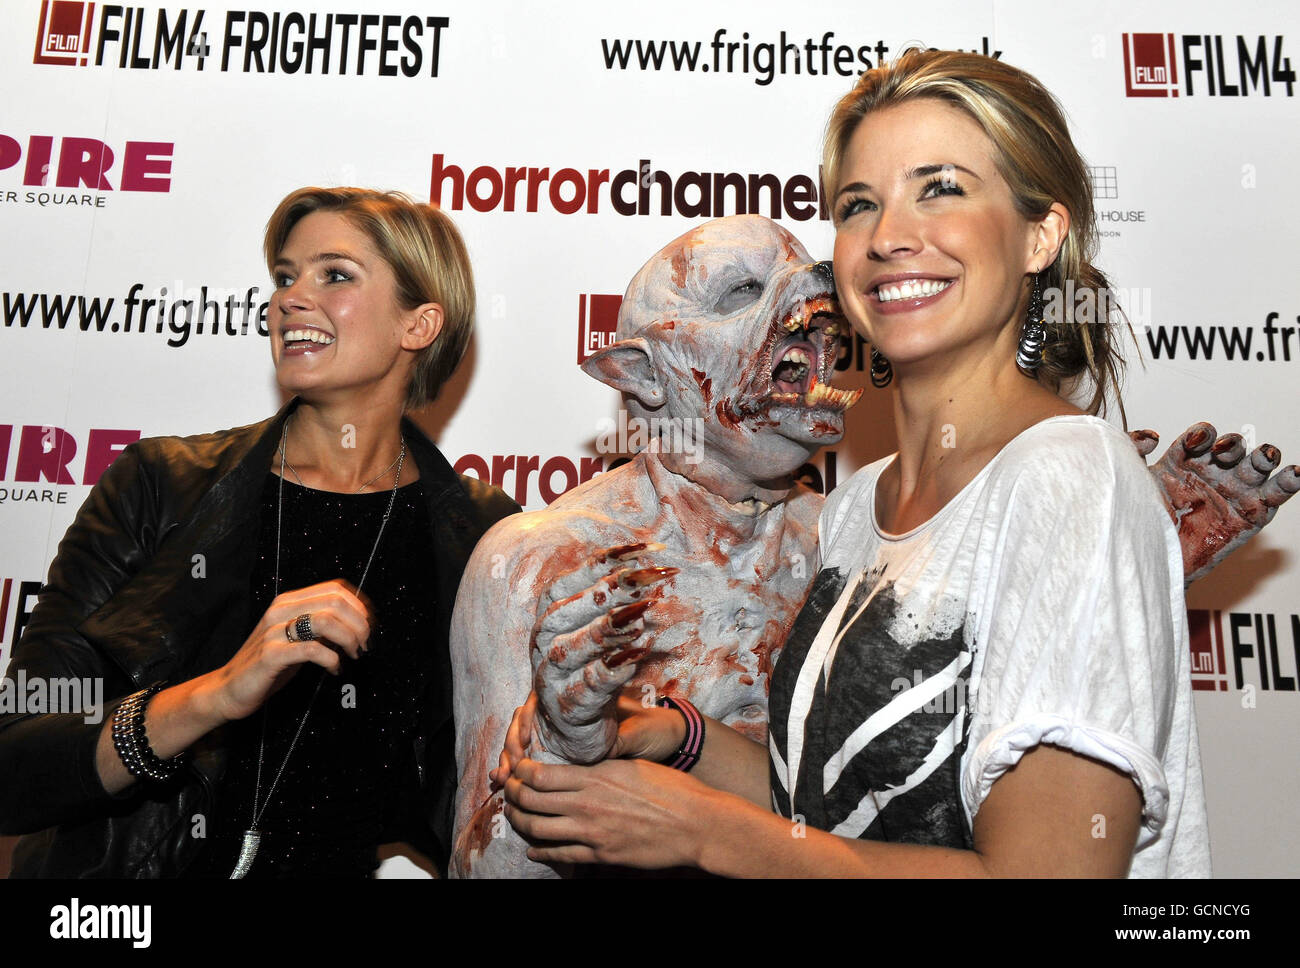 Gemma Atkinson (right) and Isabella Calthorpe pose with a werewolf to promote new British horror film 13 hrs which premiered at the Empire Cinema in Leicester Square, London, as part of Film 4's Frightfest horror movie festival. Stock Photo